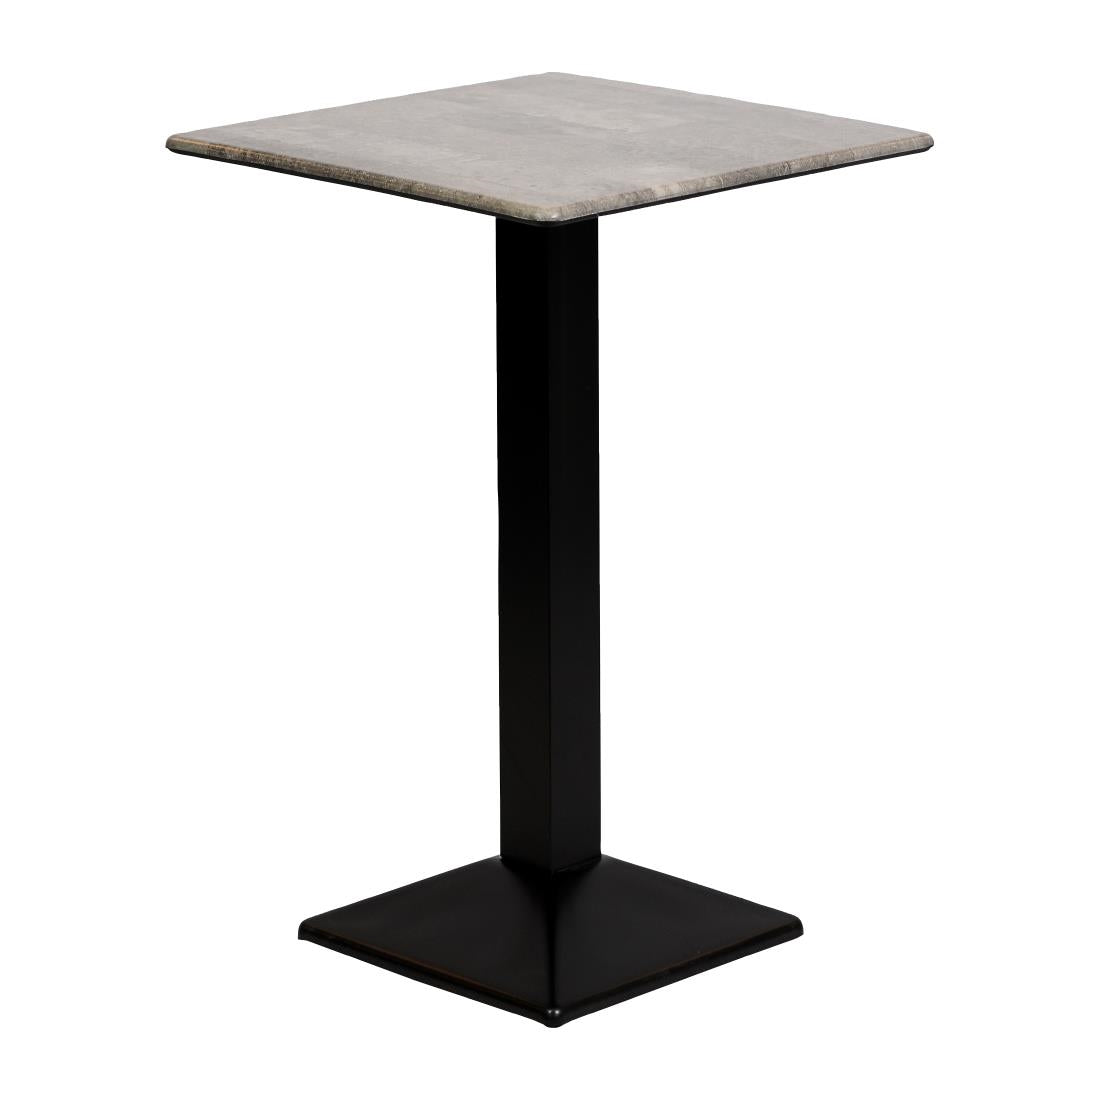 CZ827 Turin Metal Base Square Poseur Table with Laminate Top Concrete 600mm JD Catering Equipment Solutions Ltd